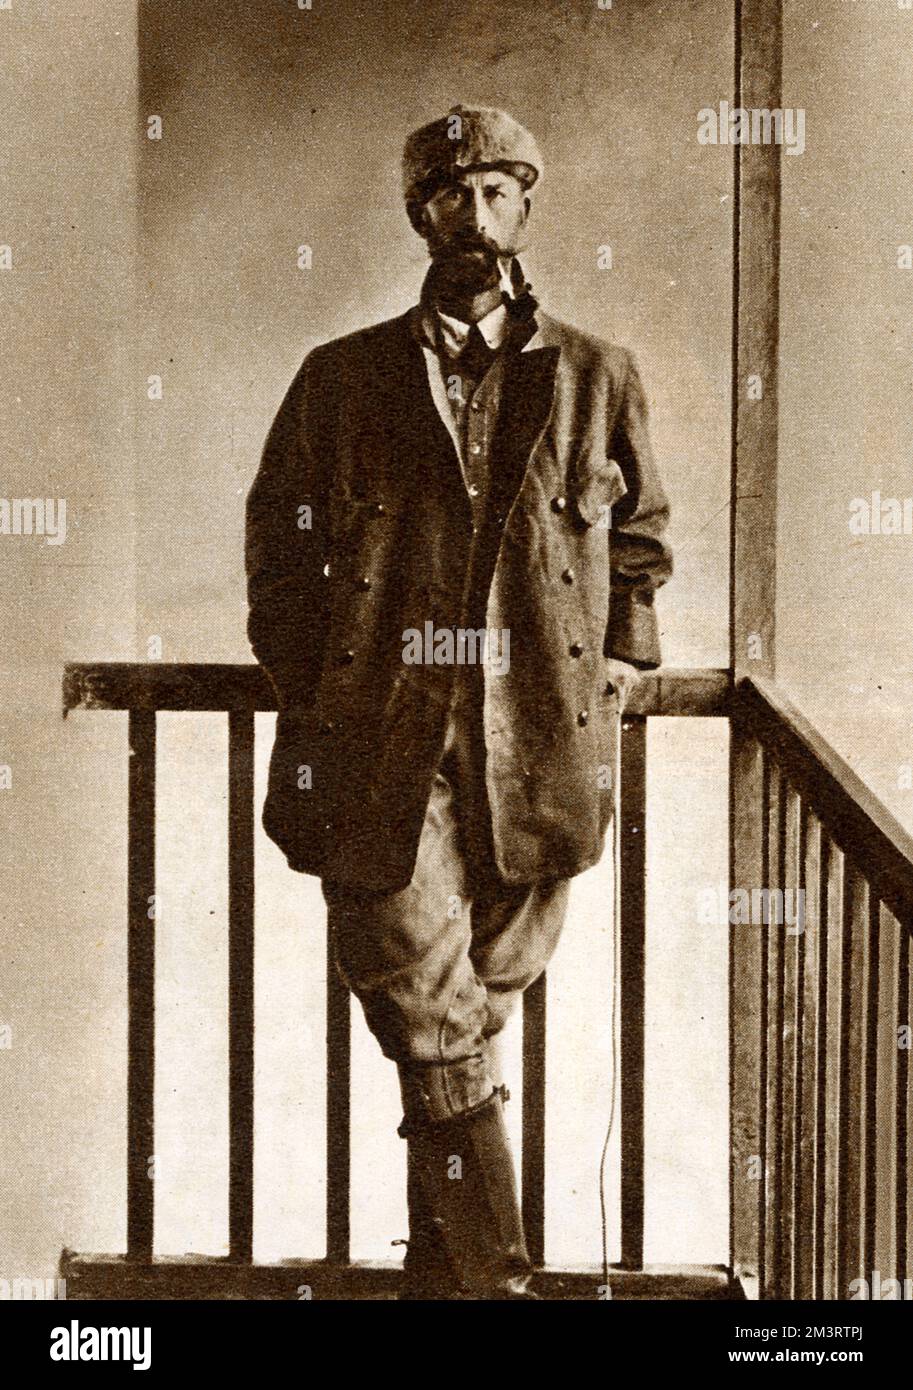 Colonel Percy Harrison Fawcett, explorer, as part of an article by Sir John Squire. Fawcett led an expedition to central Brazil in 1925 and disappeared.   1953 Stock Photo